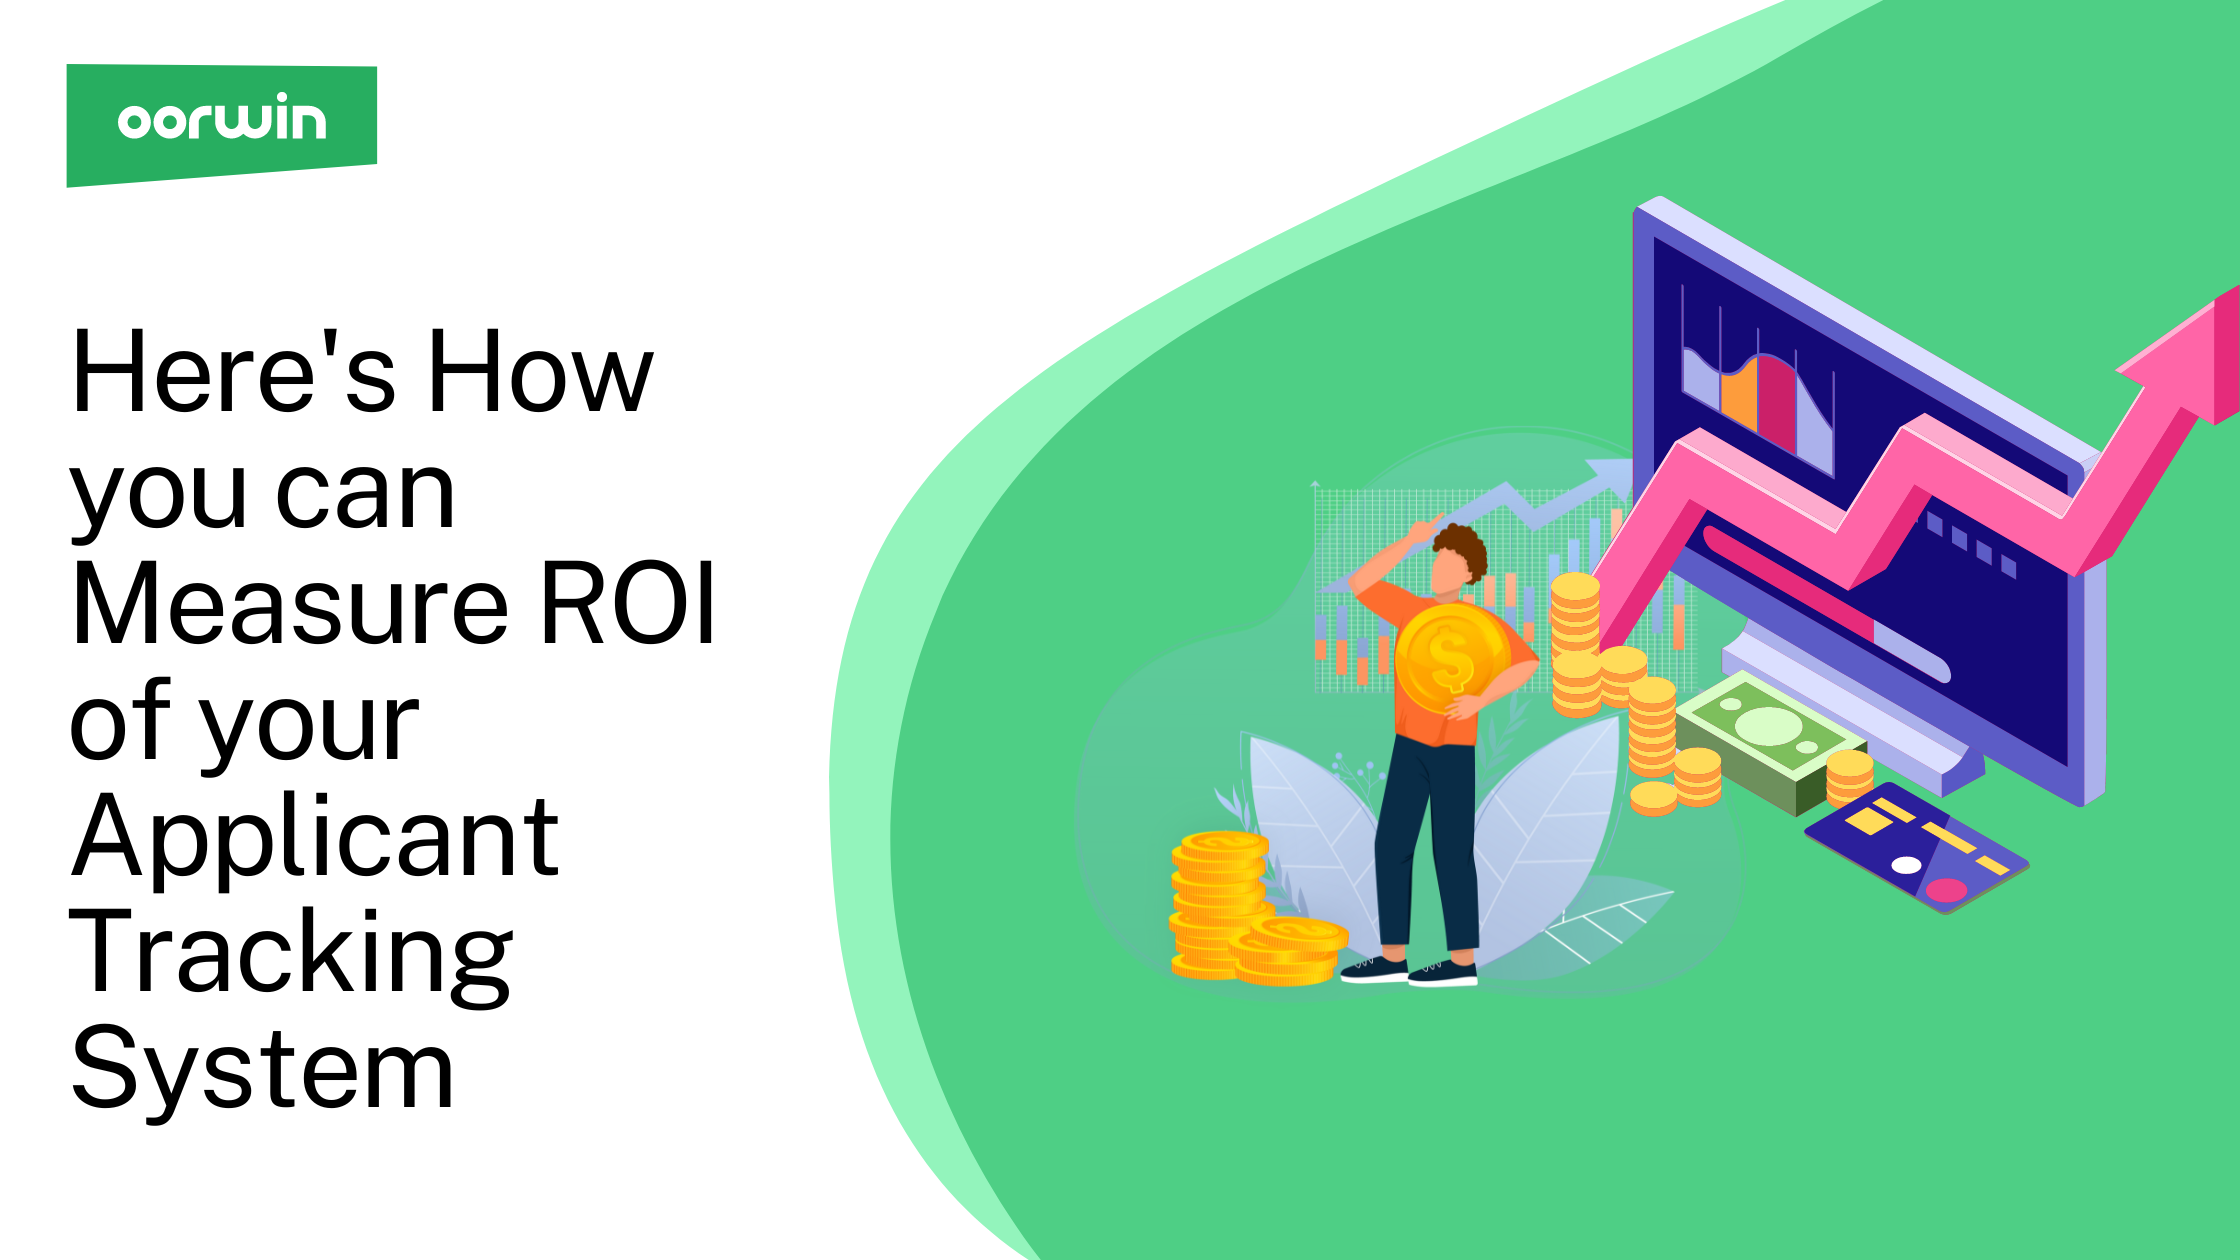 Here’s How You Can Measure ROI of Your Applicant Tracking System